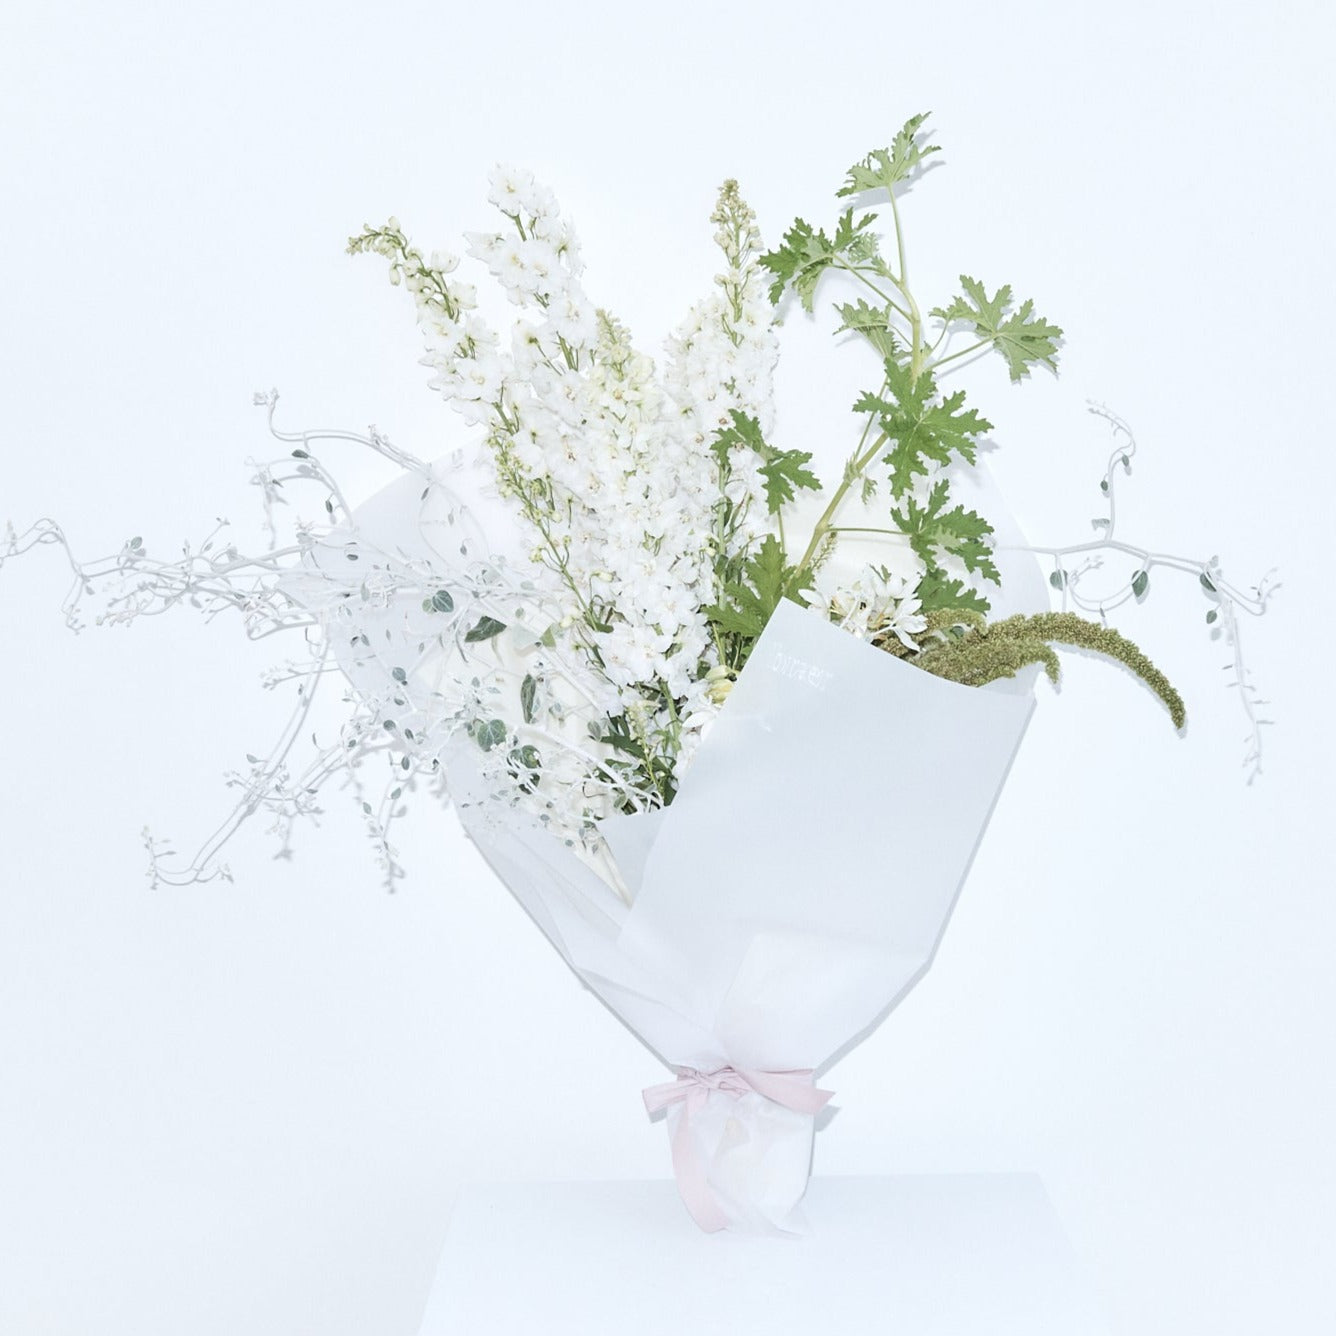 Gesture neutral tone local flowers florist by Claudia Smith | Braer Studio